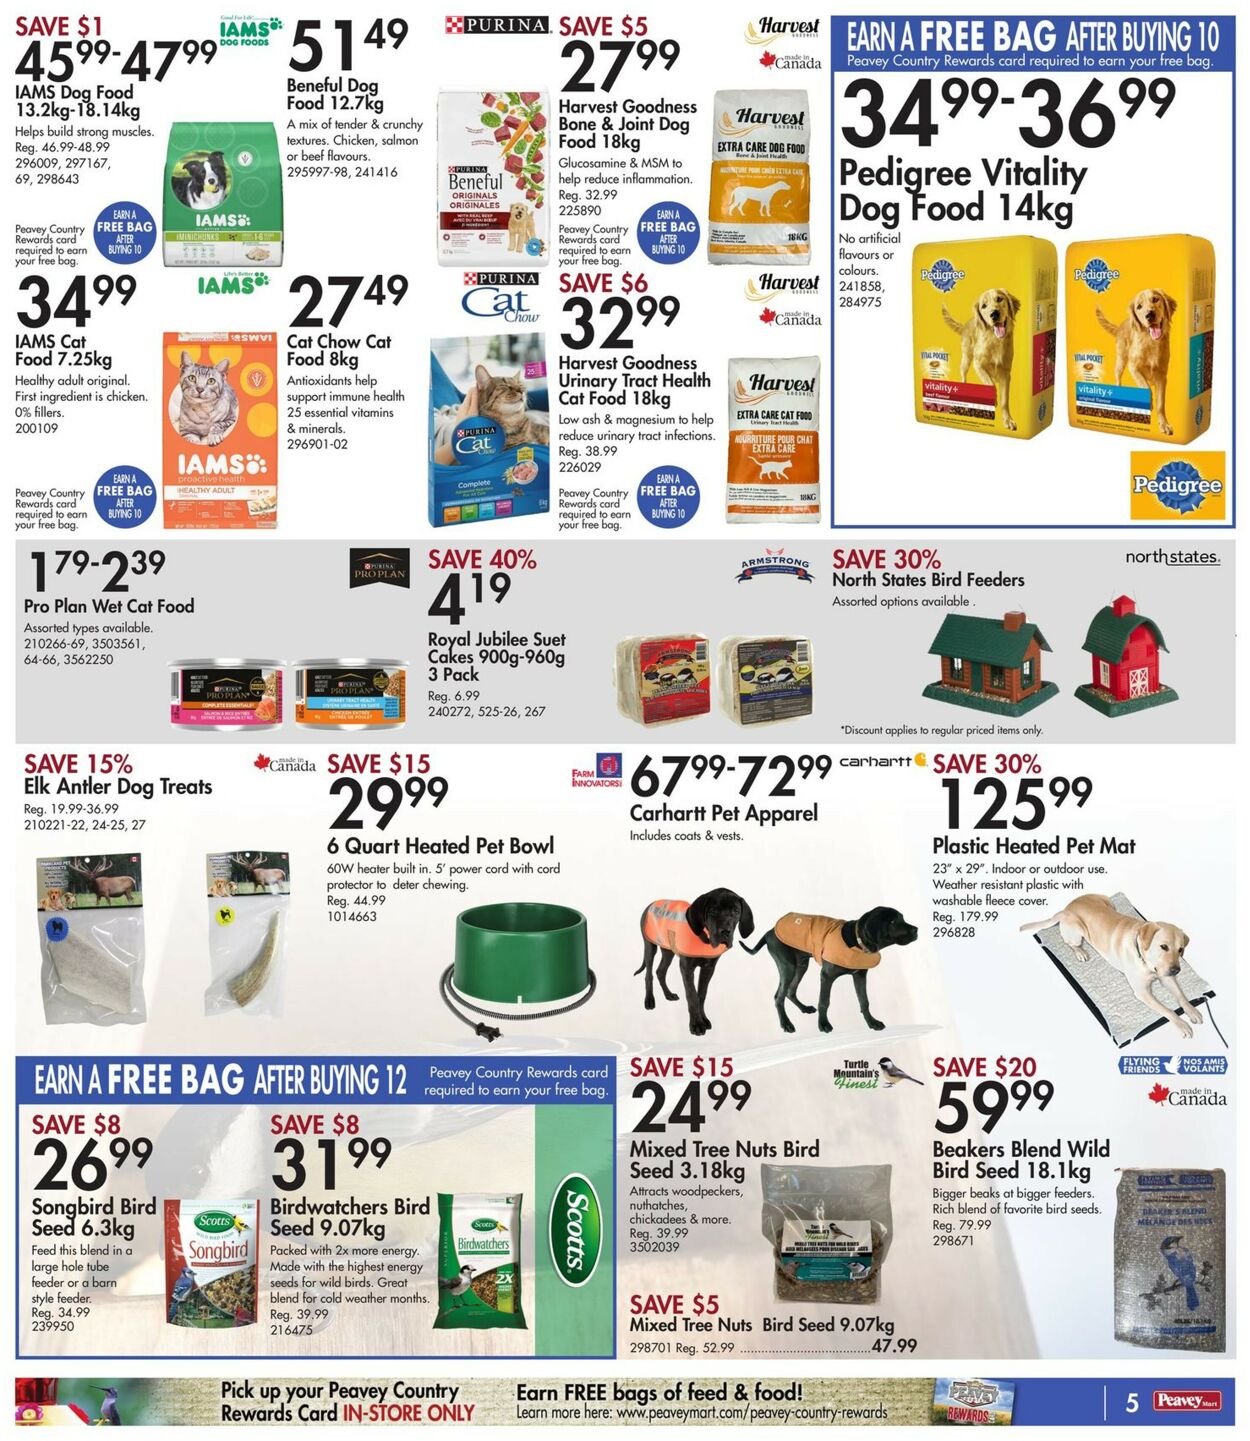 Peavey Mart Flyer from 12/30/2022